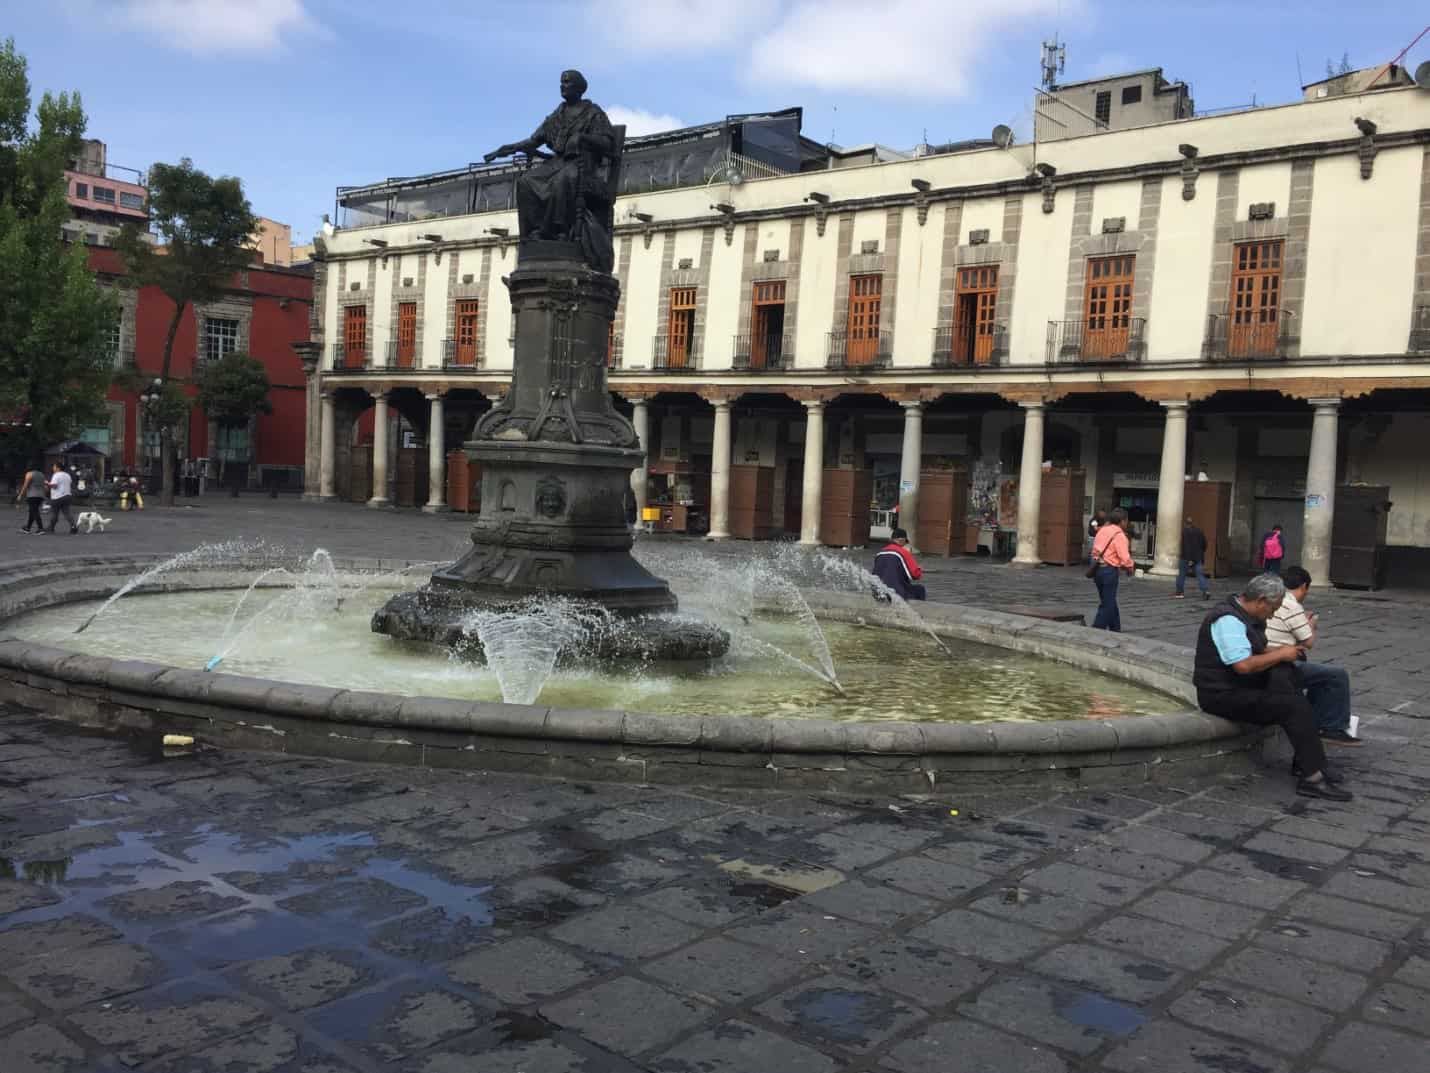 FURTHER ADVENTURES IN MEXICO CITY: Travels in Latin America [Part 3]